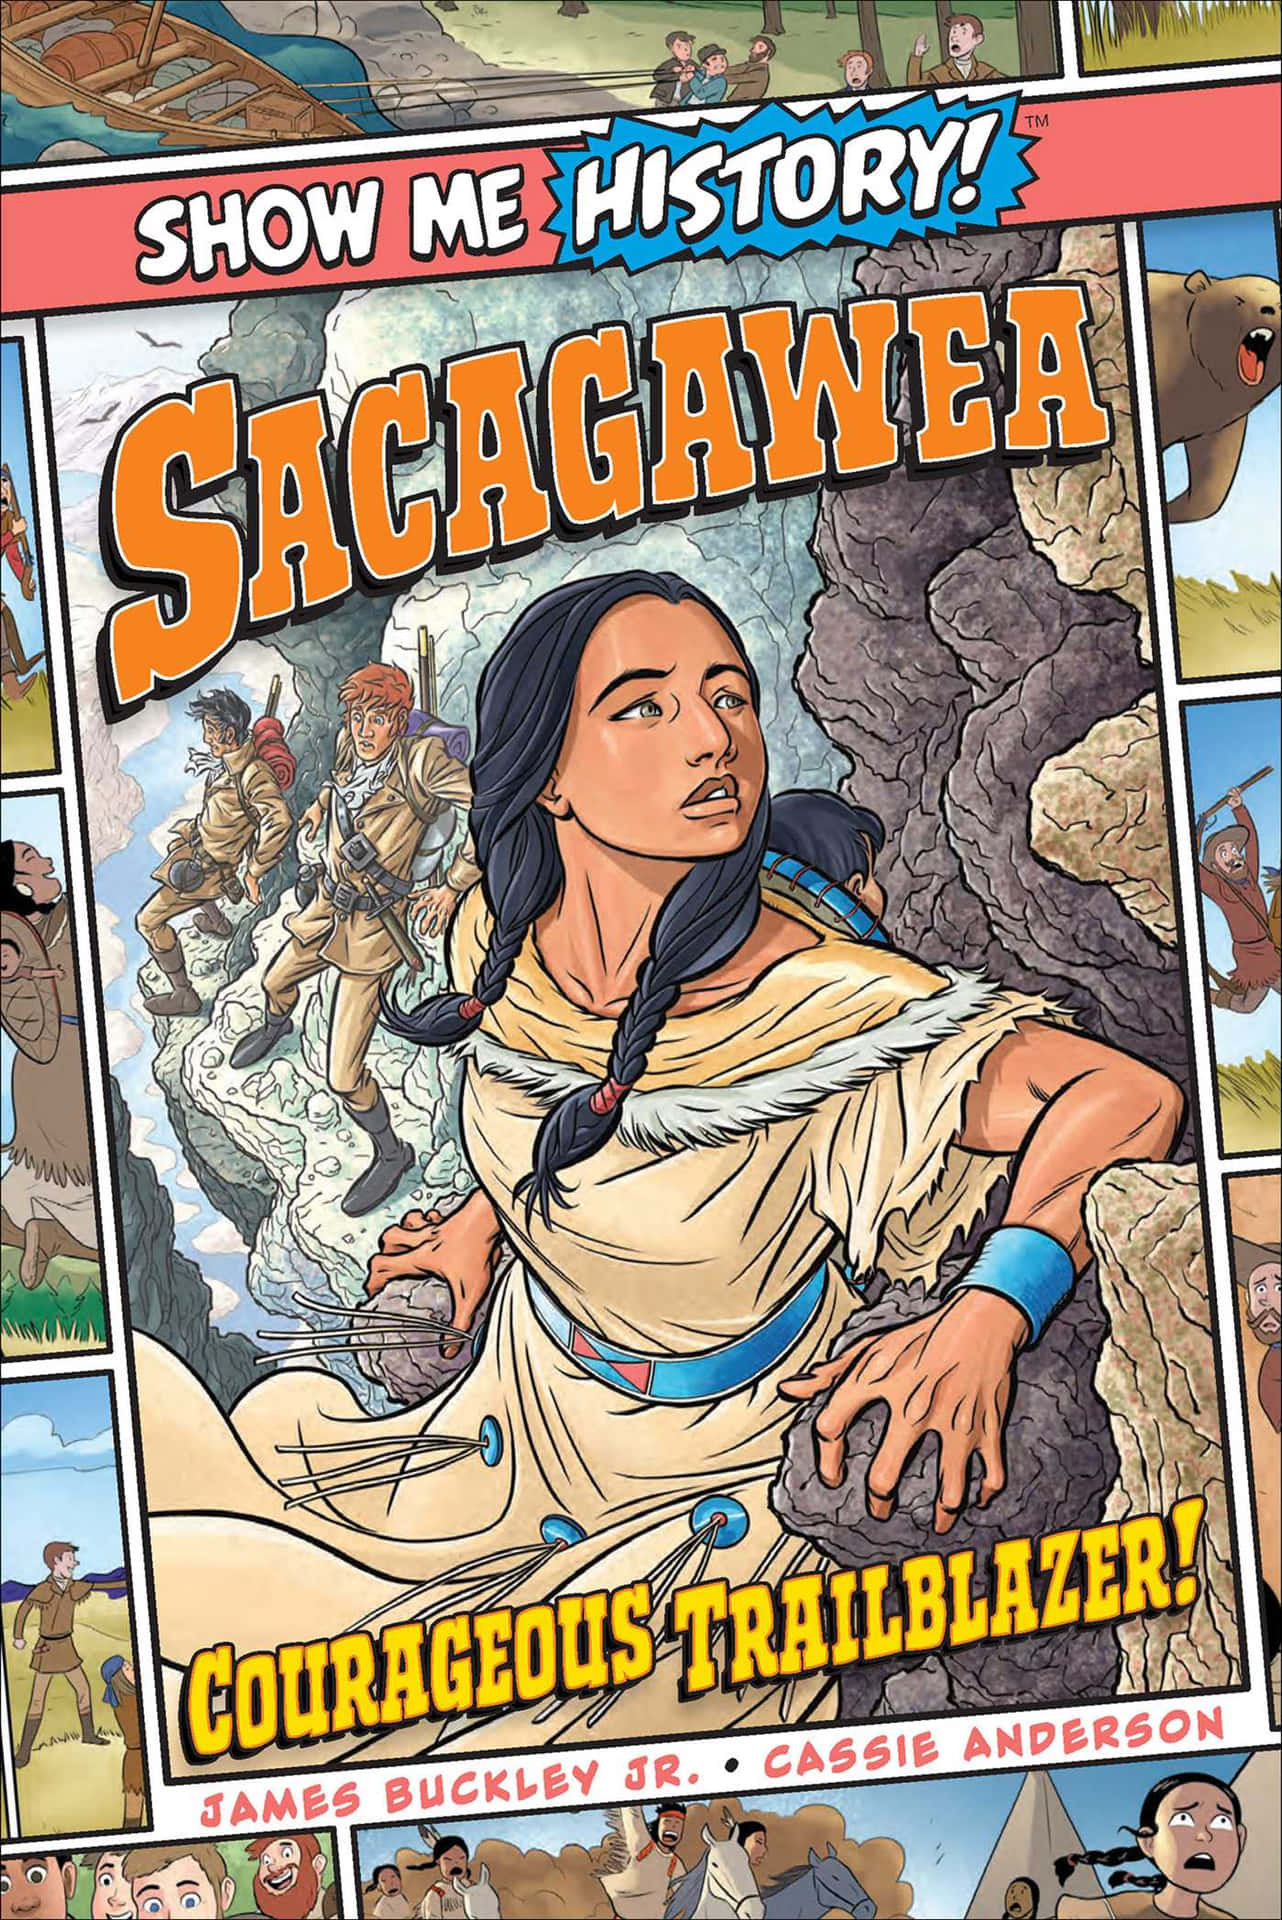 Show Me History Sagagawer - A Book With Illustrations